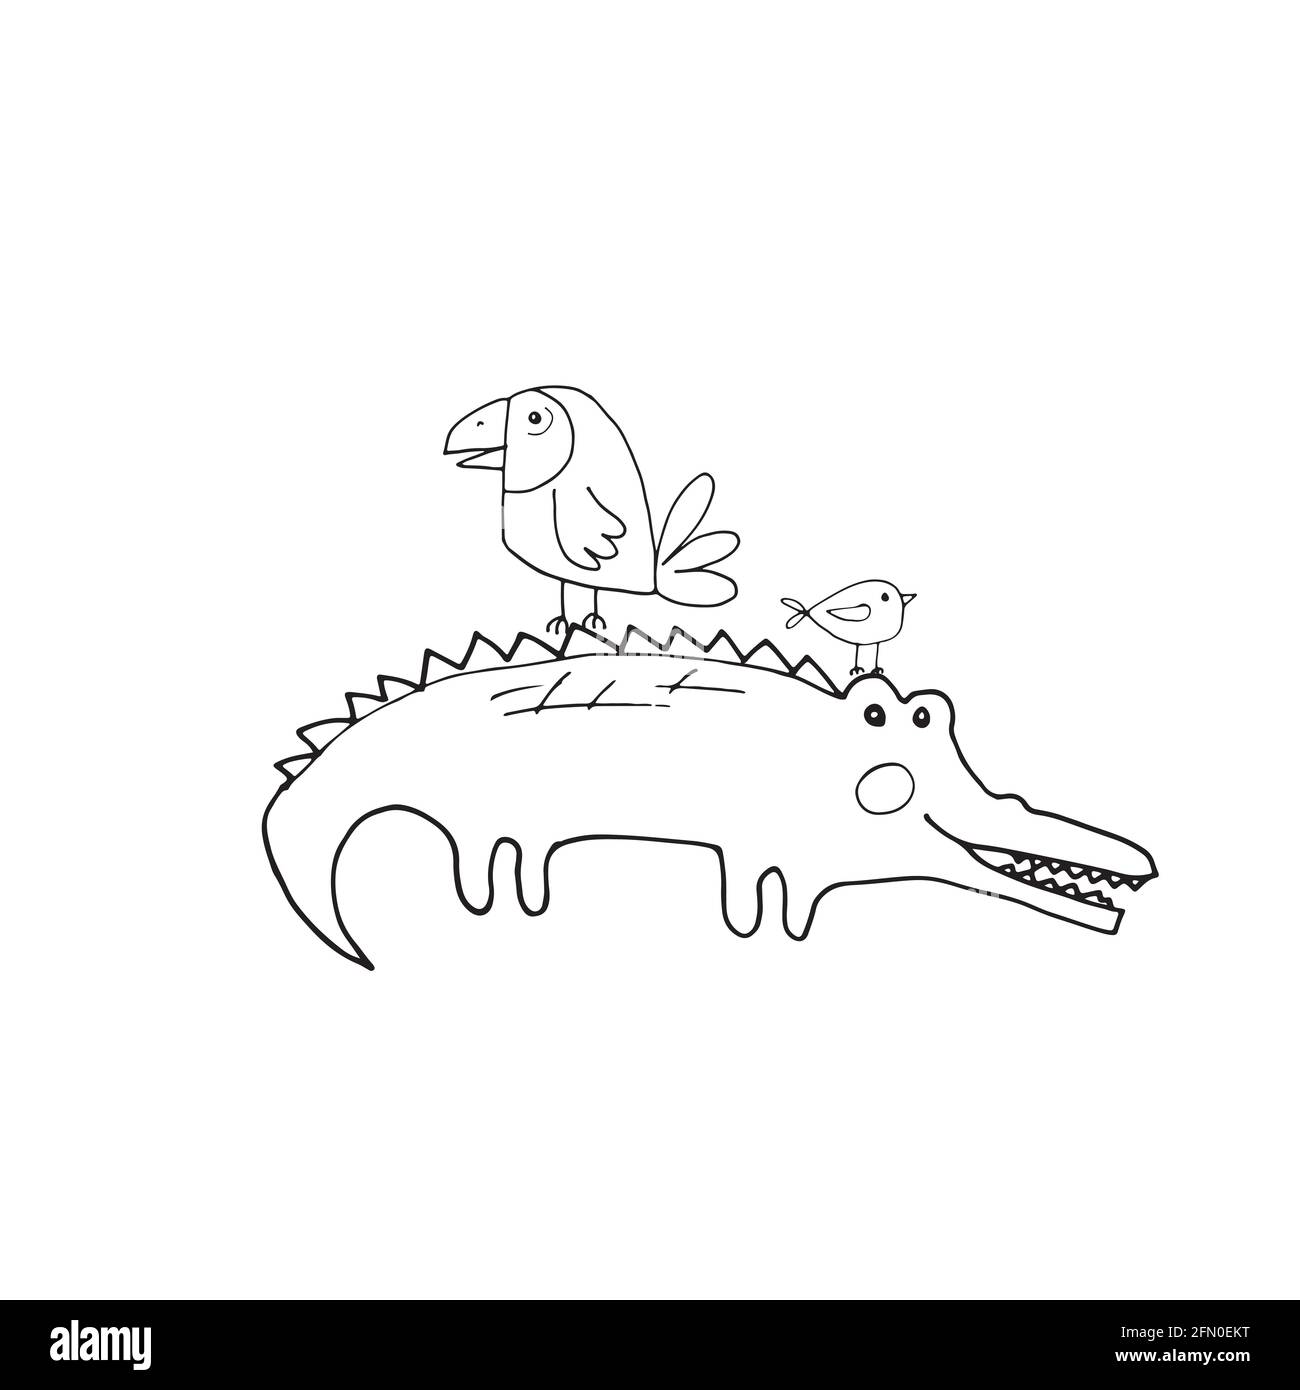 Easy Alligator drawing] Learn how to draw Cute Crocodile - EASY TO DRAW  EVERYTHING